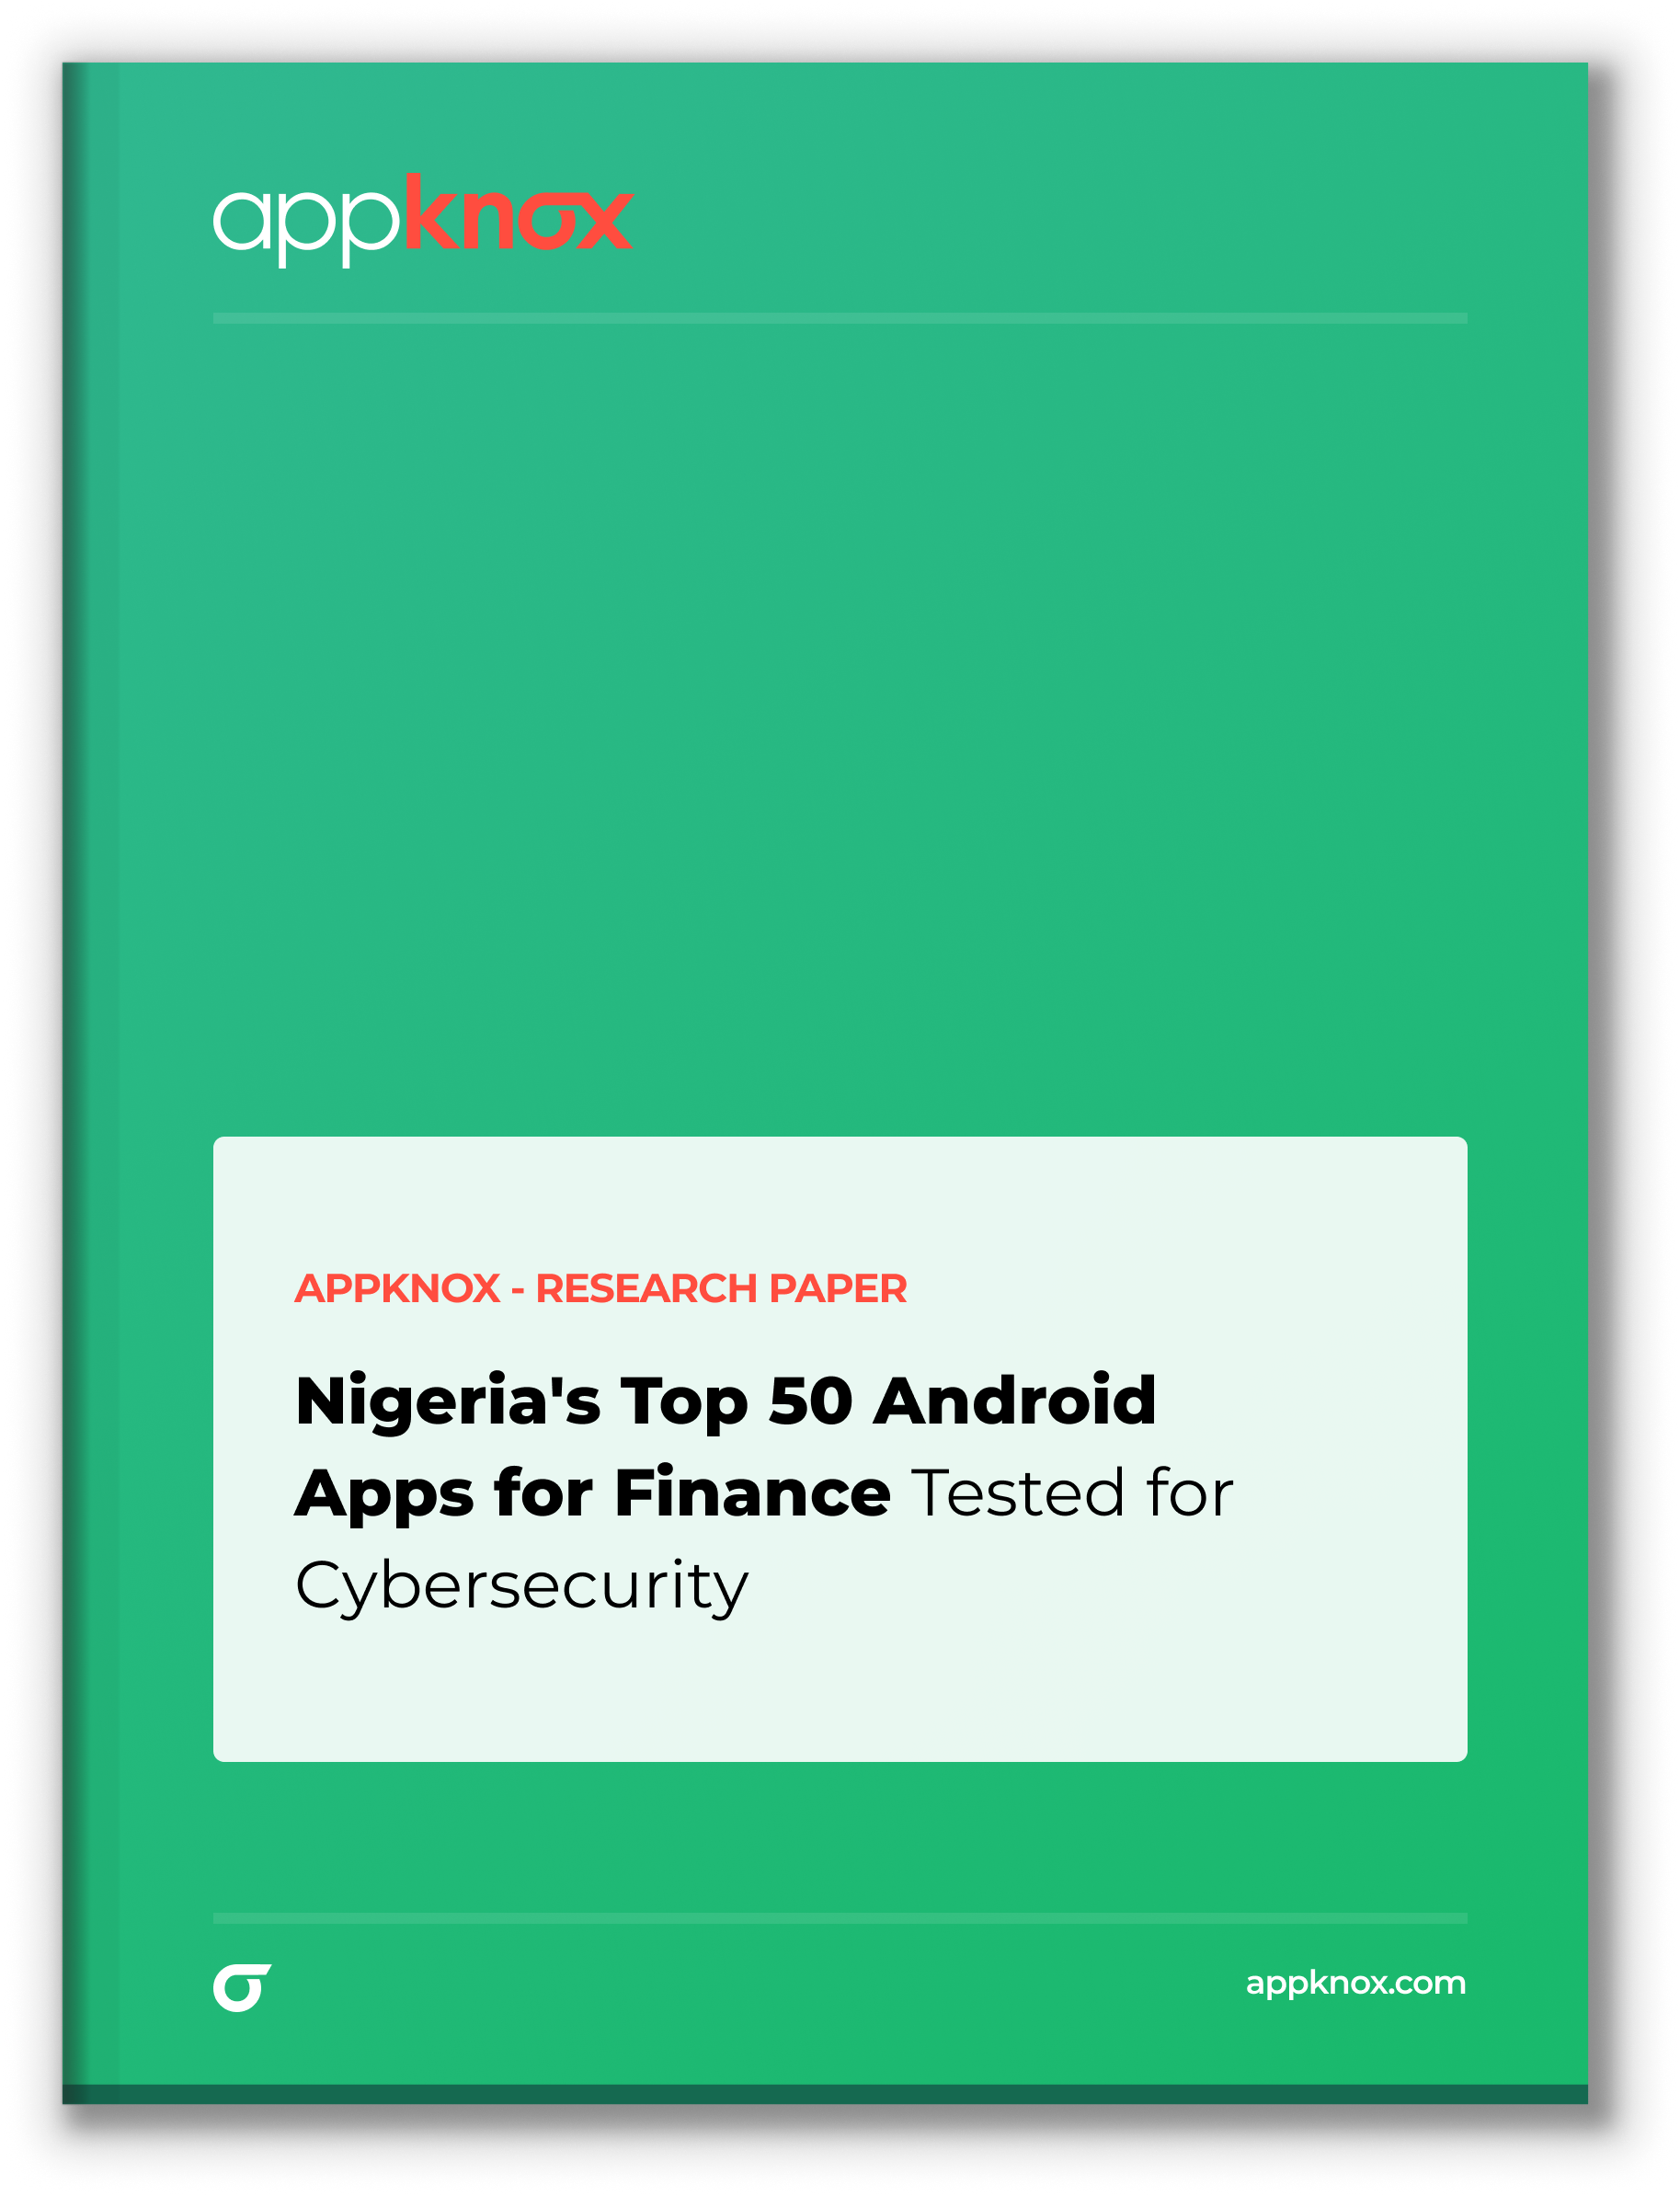 Nigerias Top 50 Android Apps for Finance Tested for Cybersecurity